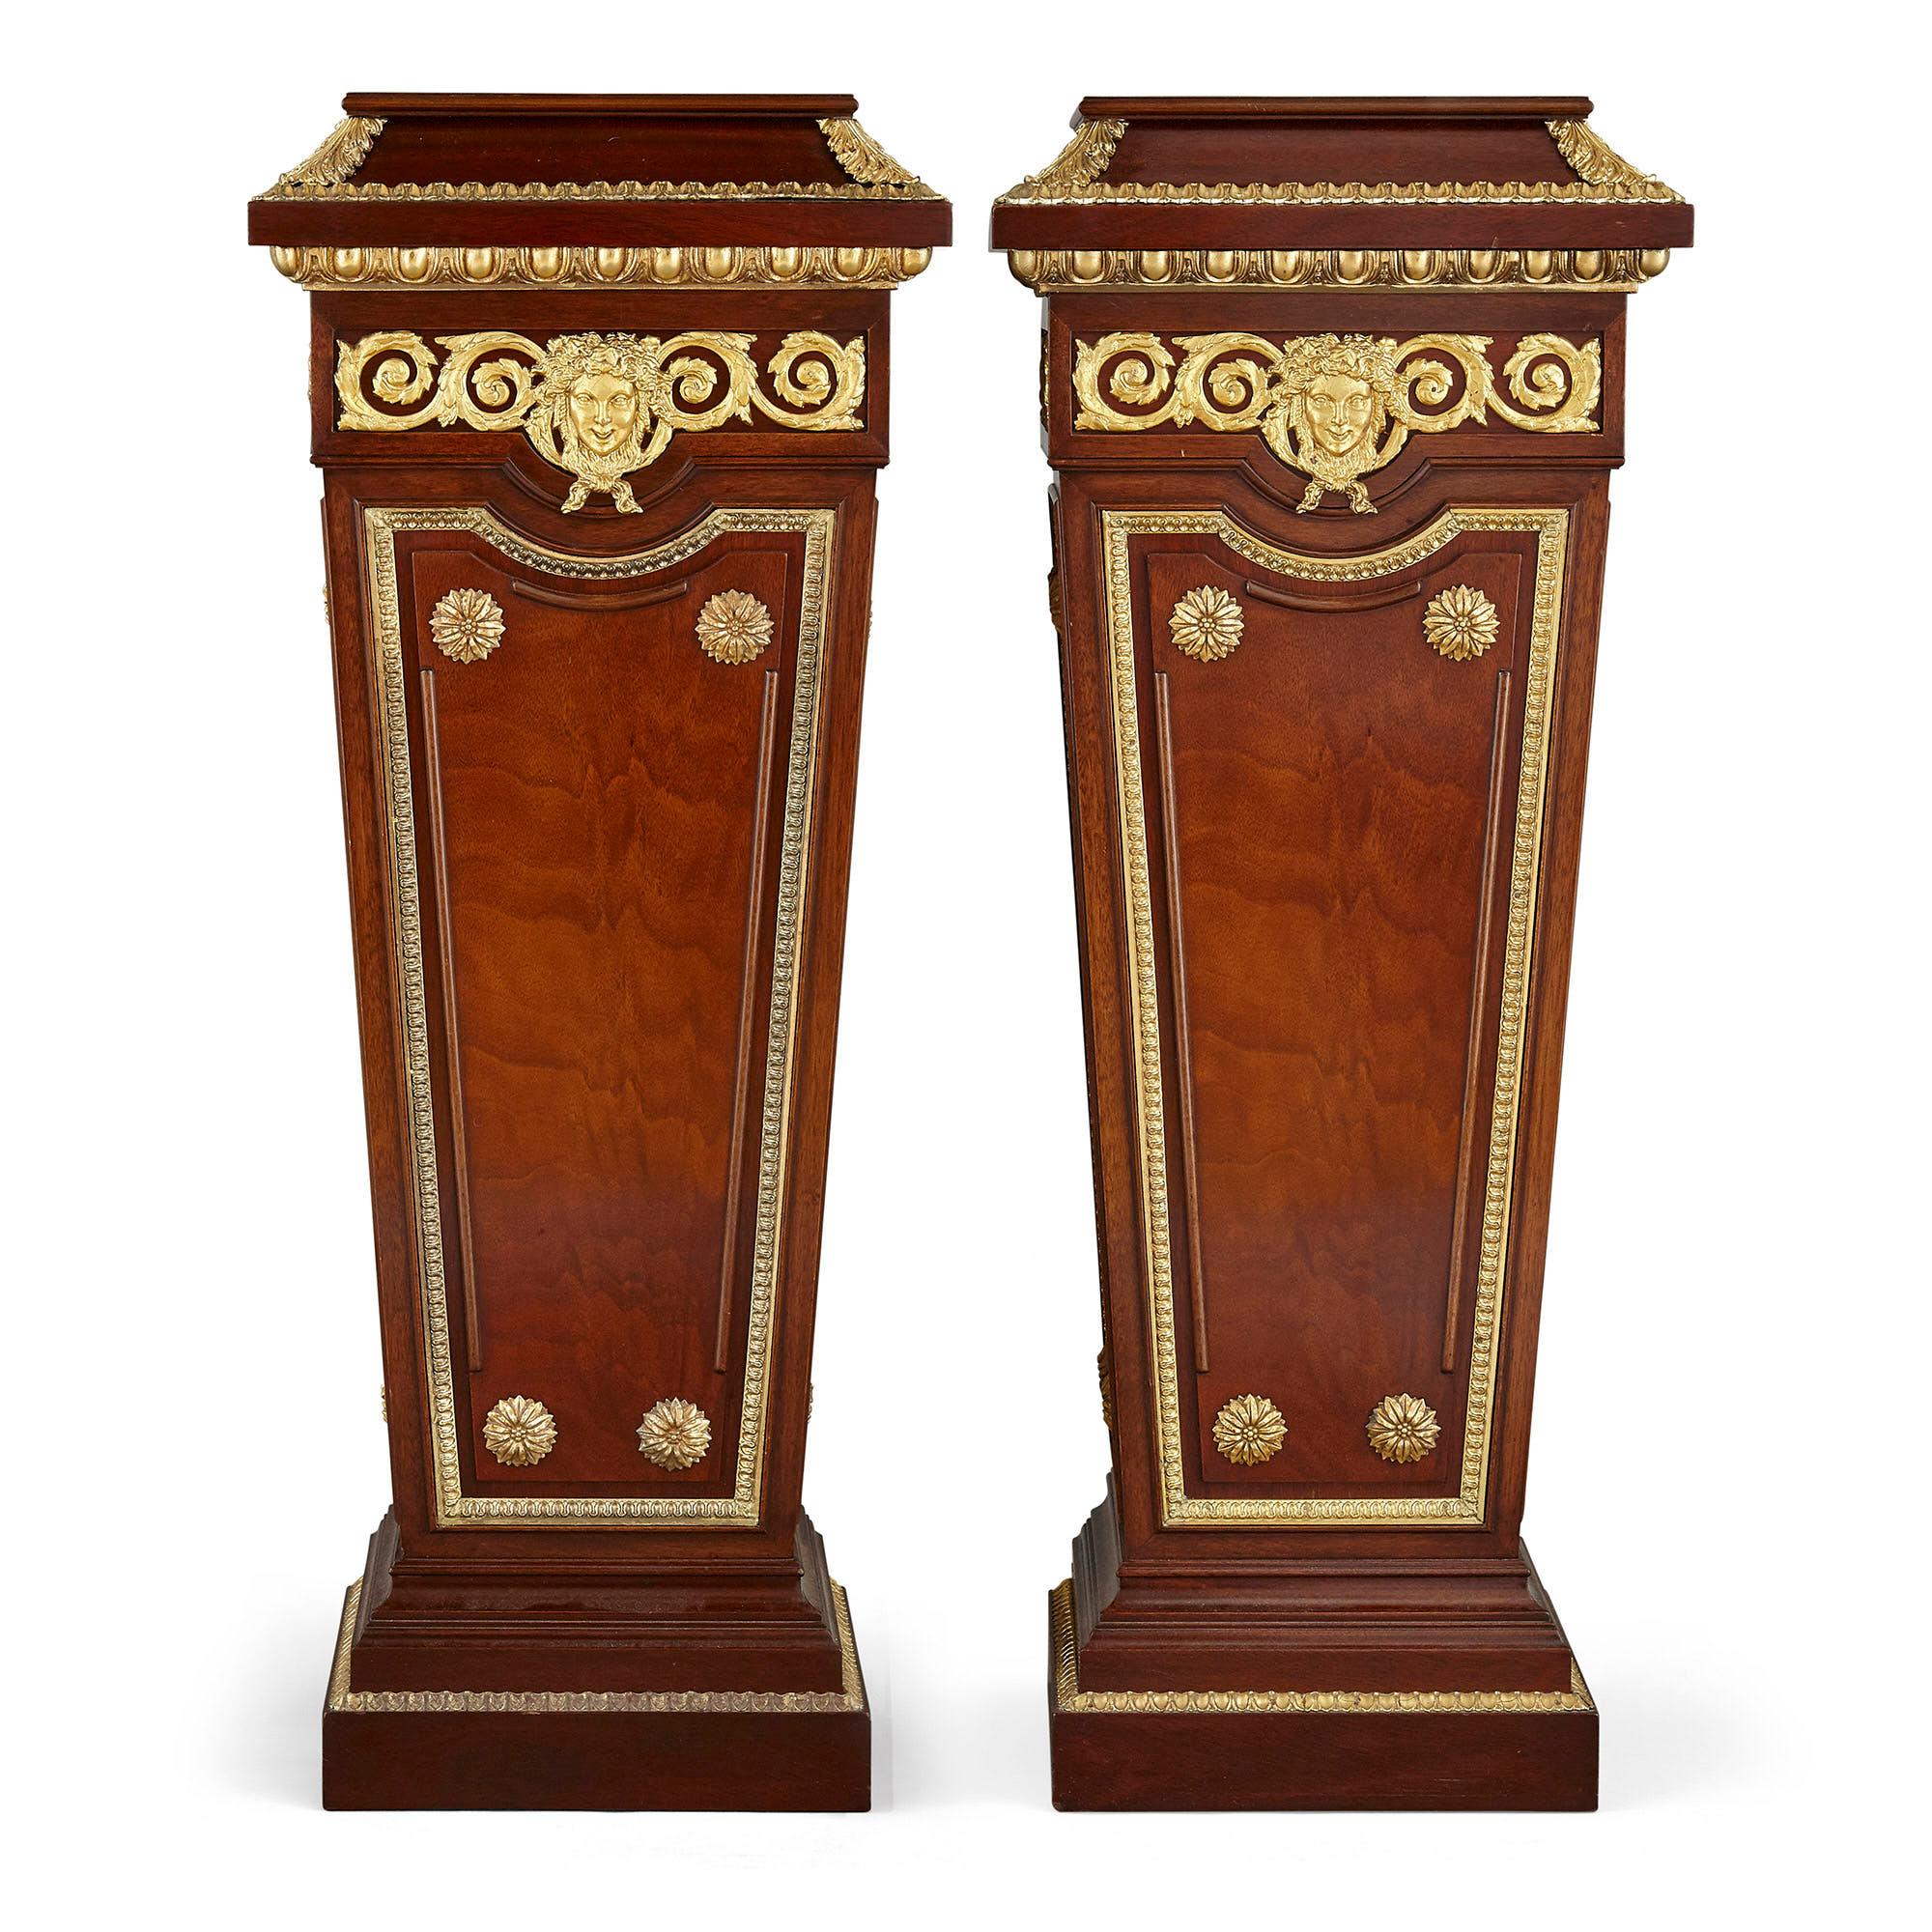 Pair of French neoclassical style parcel gilt mahogany pedestals
French, early 20th century
Measures: Height 104cm, width 41cm, depth 33cm

This fine pair of mahogany pedestals is crafted in the Neoclassical style. Each pedestal is of tapering